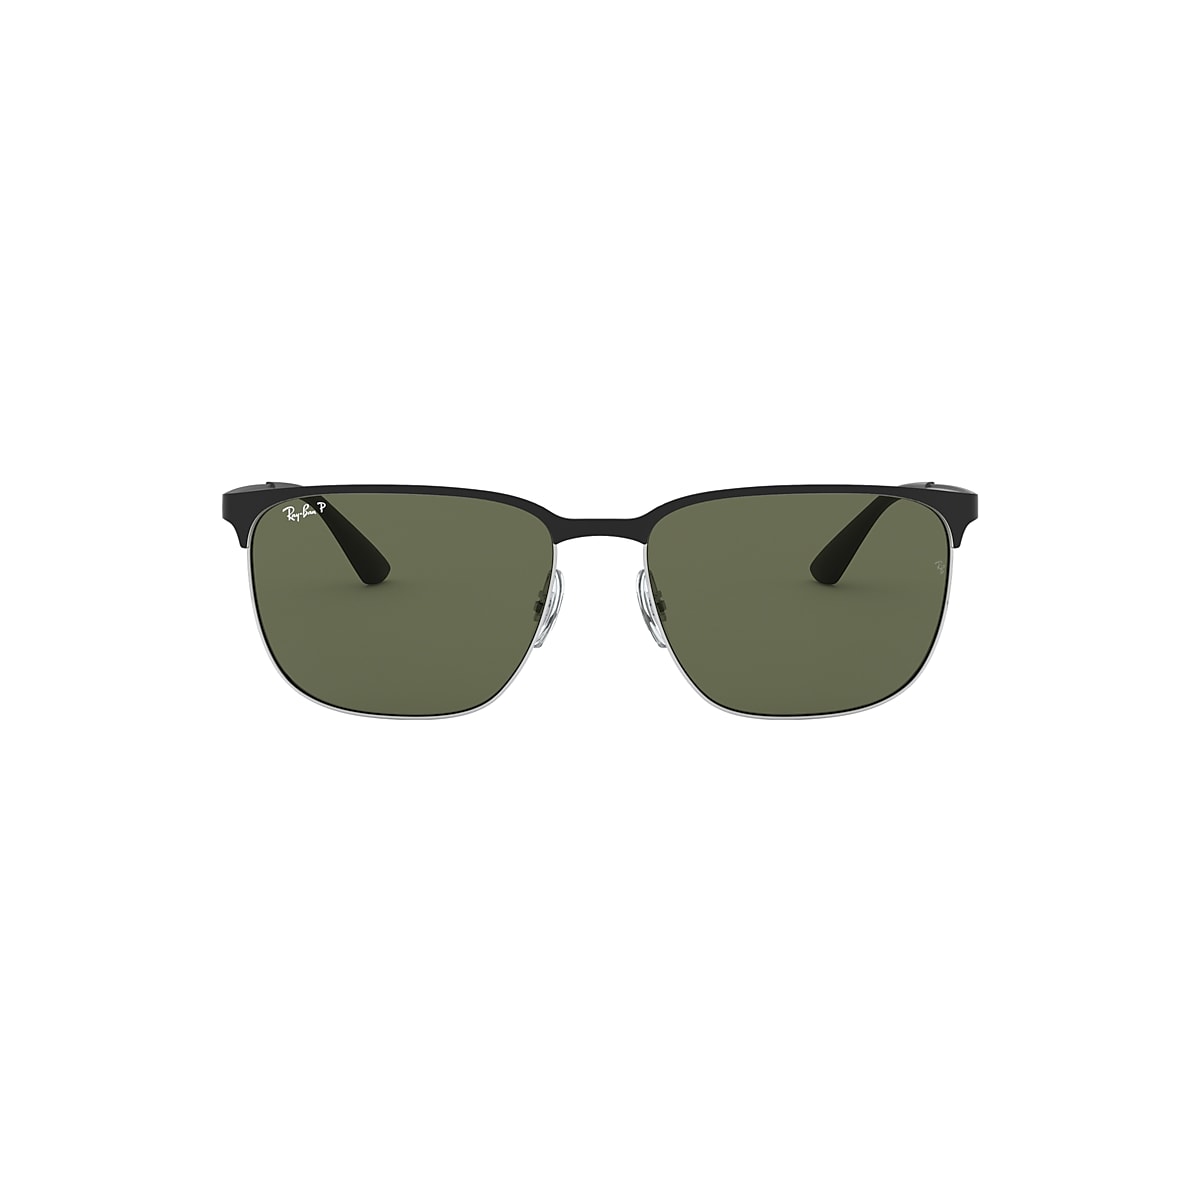 RB3569 Sunglasses in Black On Silver and Green - Ray-Ban